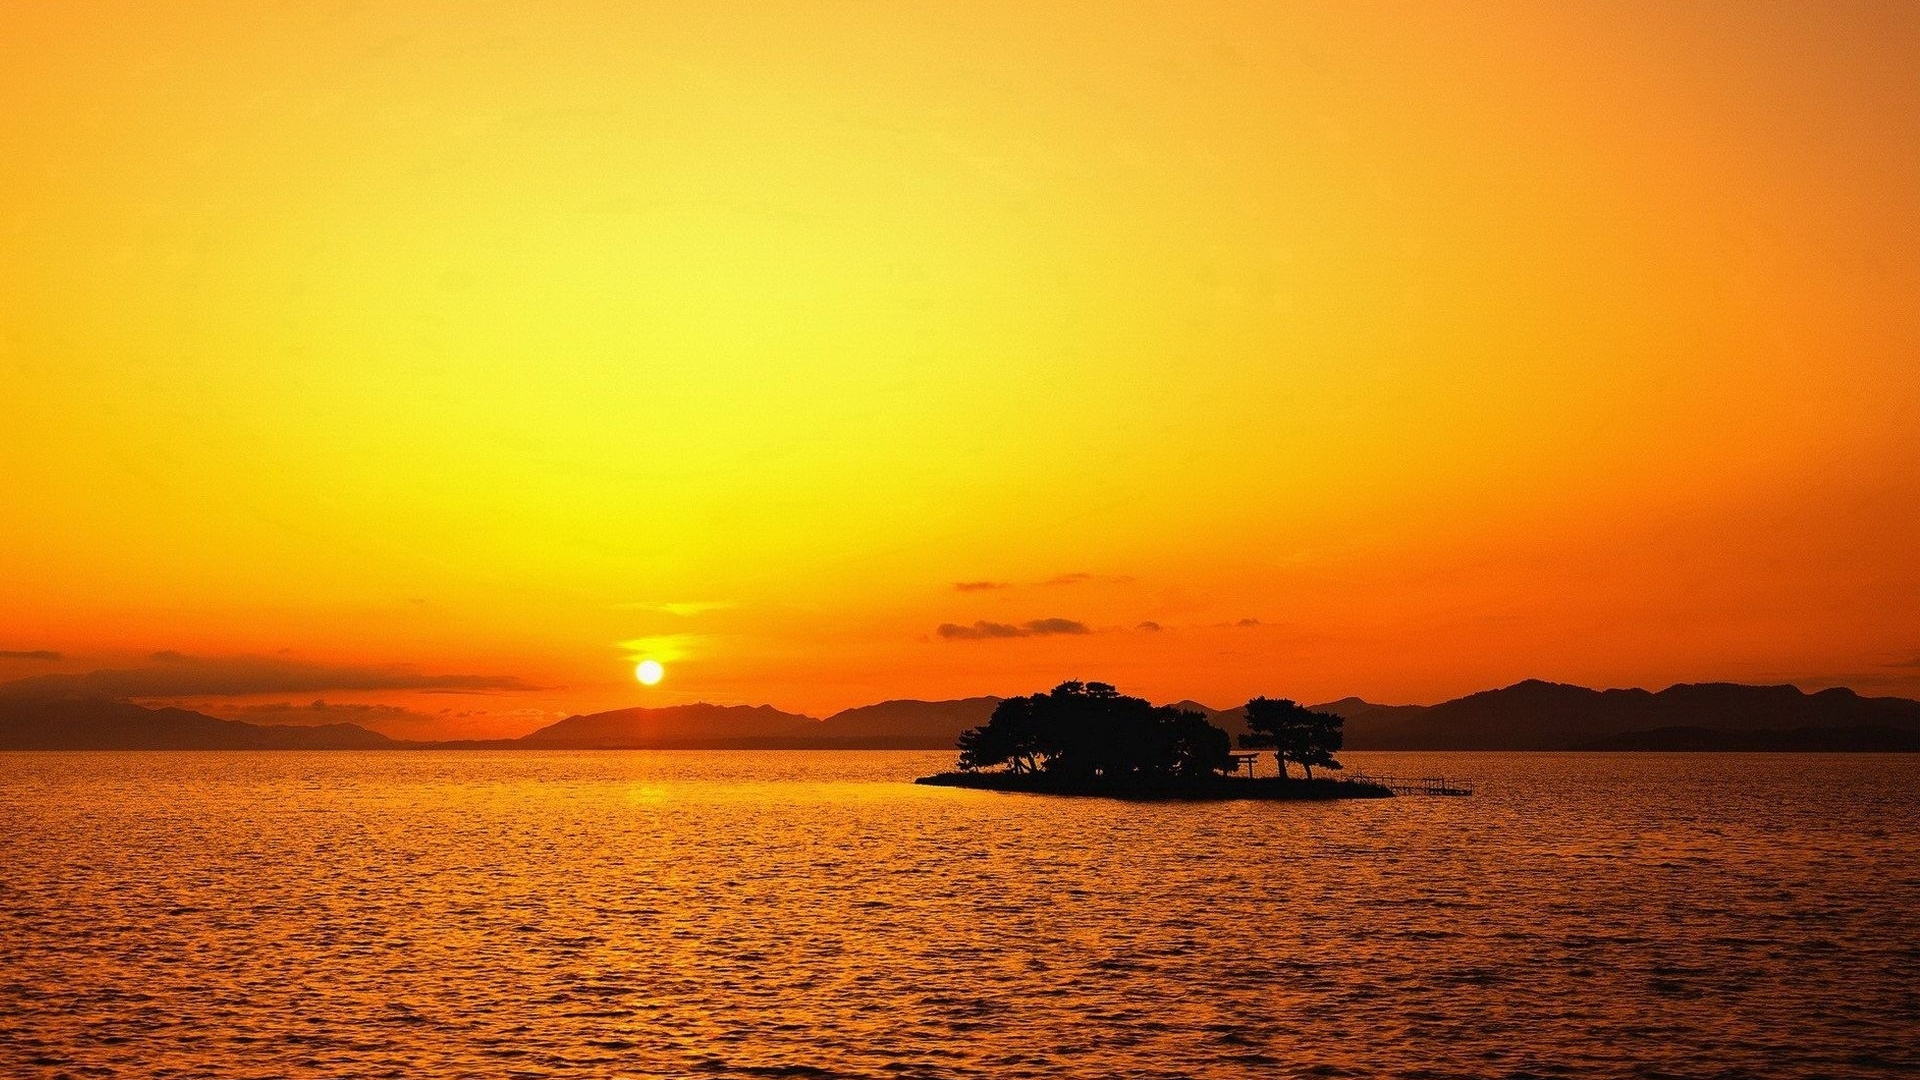 Silhouette of Island During Sunset. Wallpaper in 1920x1080 Resolution